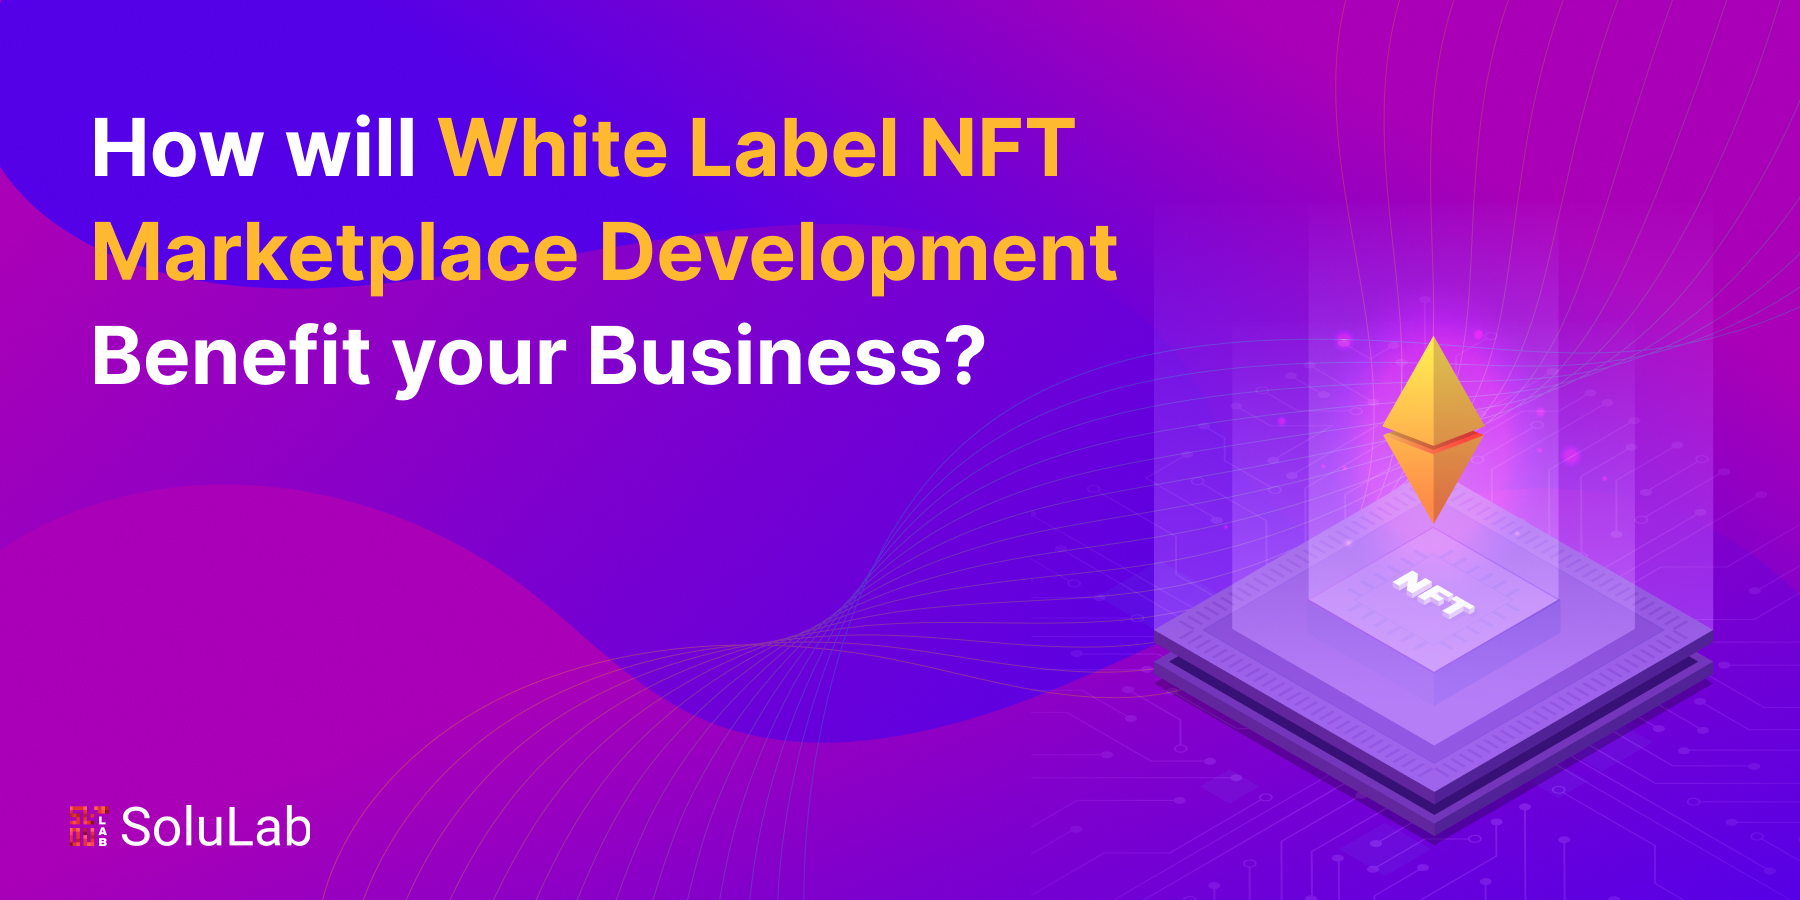 How Will White Label NFT Marketplace Development Benefit your Business?